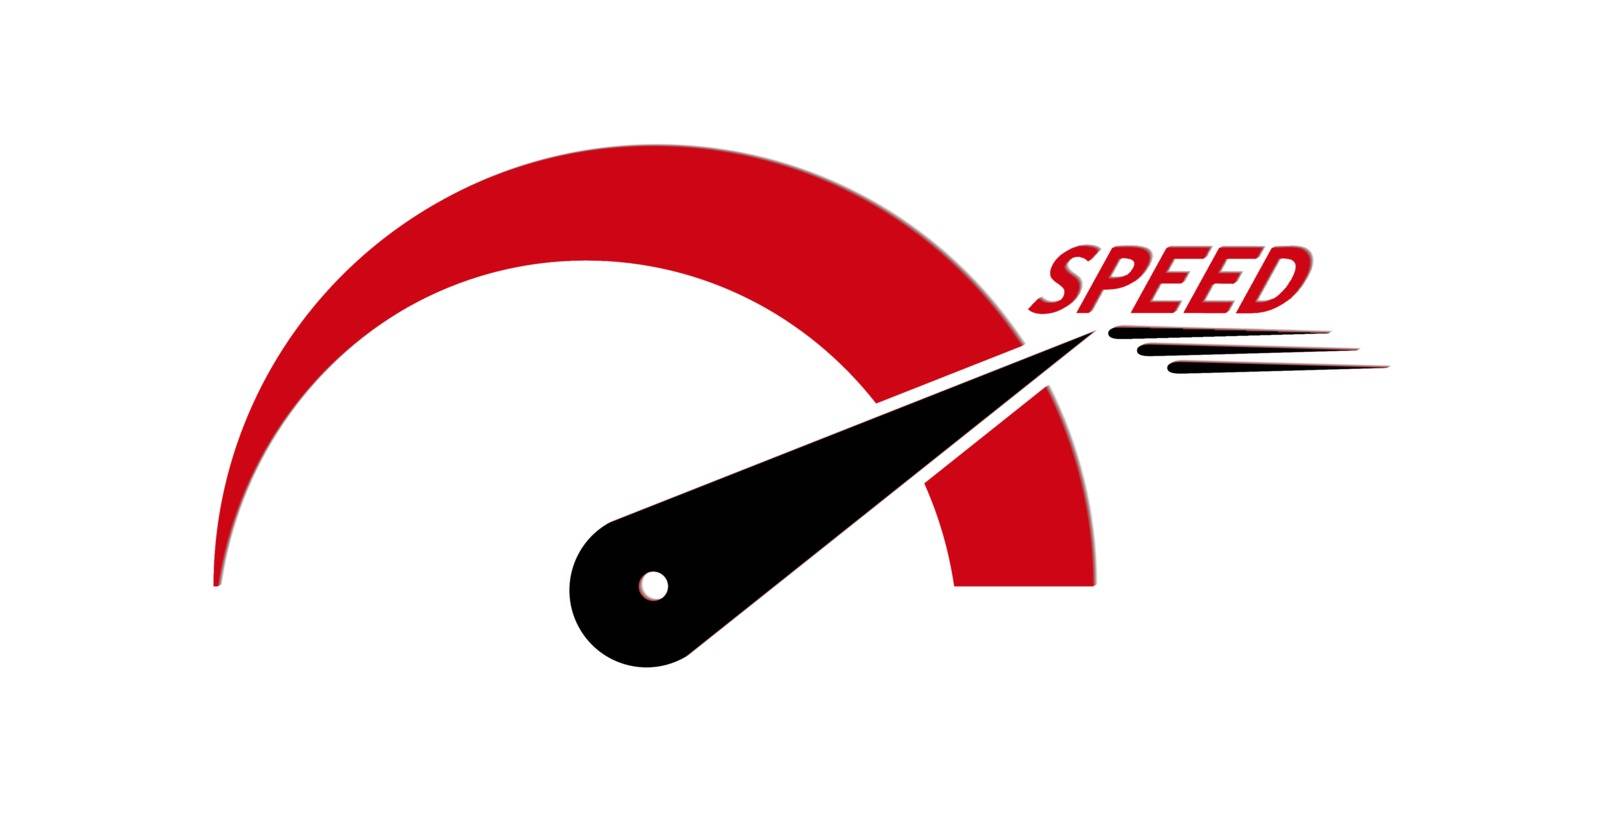 Illustration with symbolic image of increasing speed and word speed.